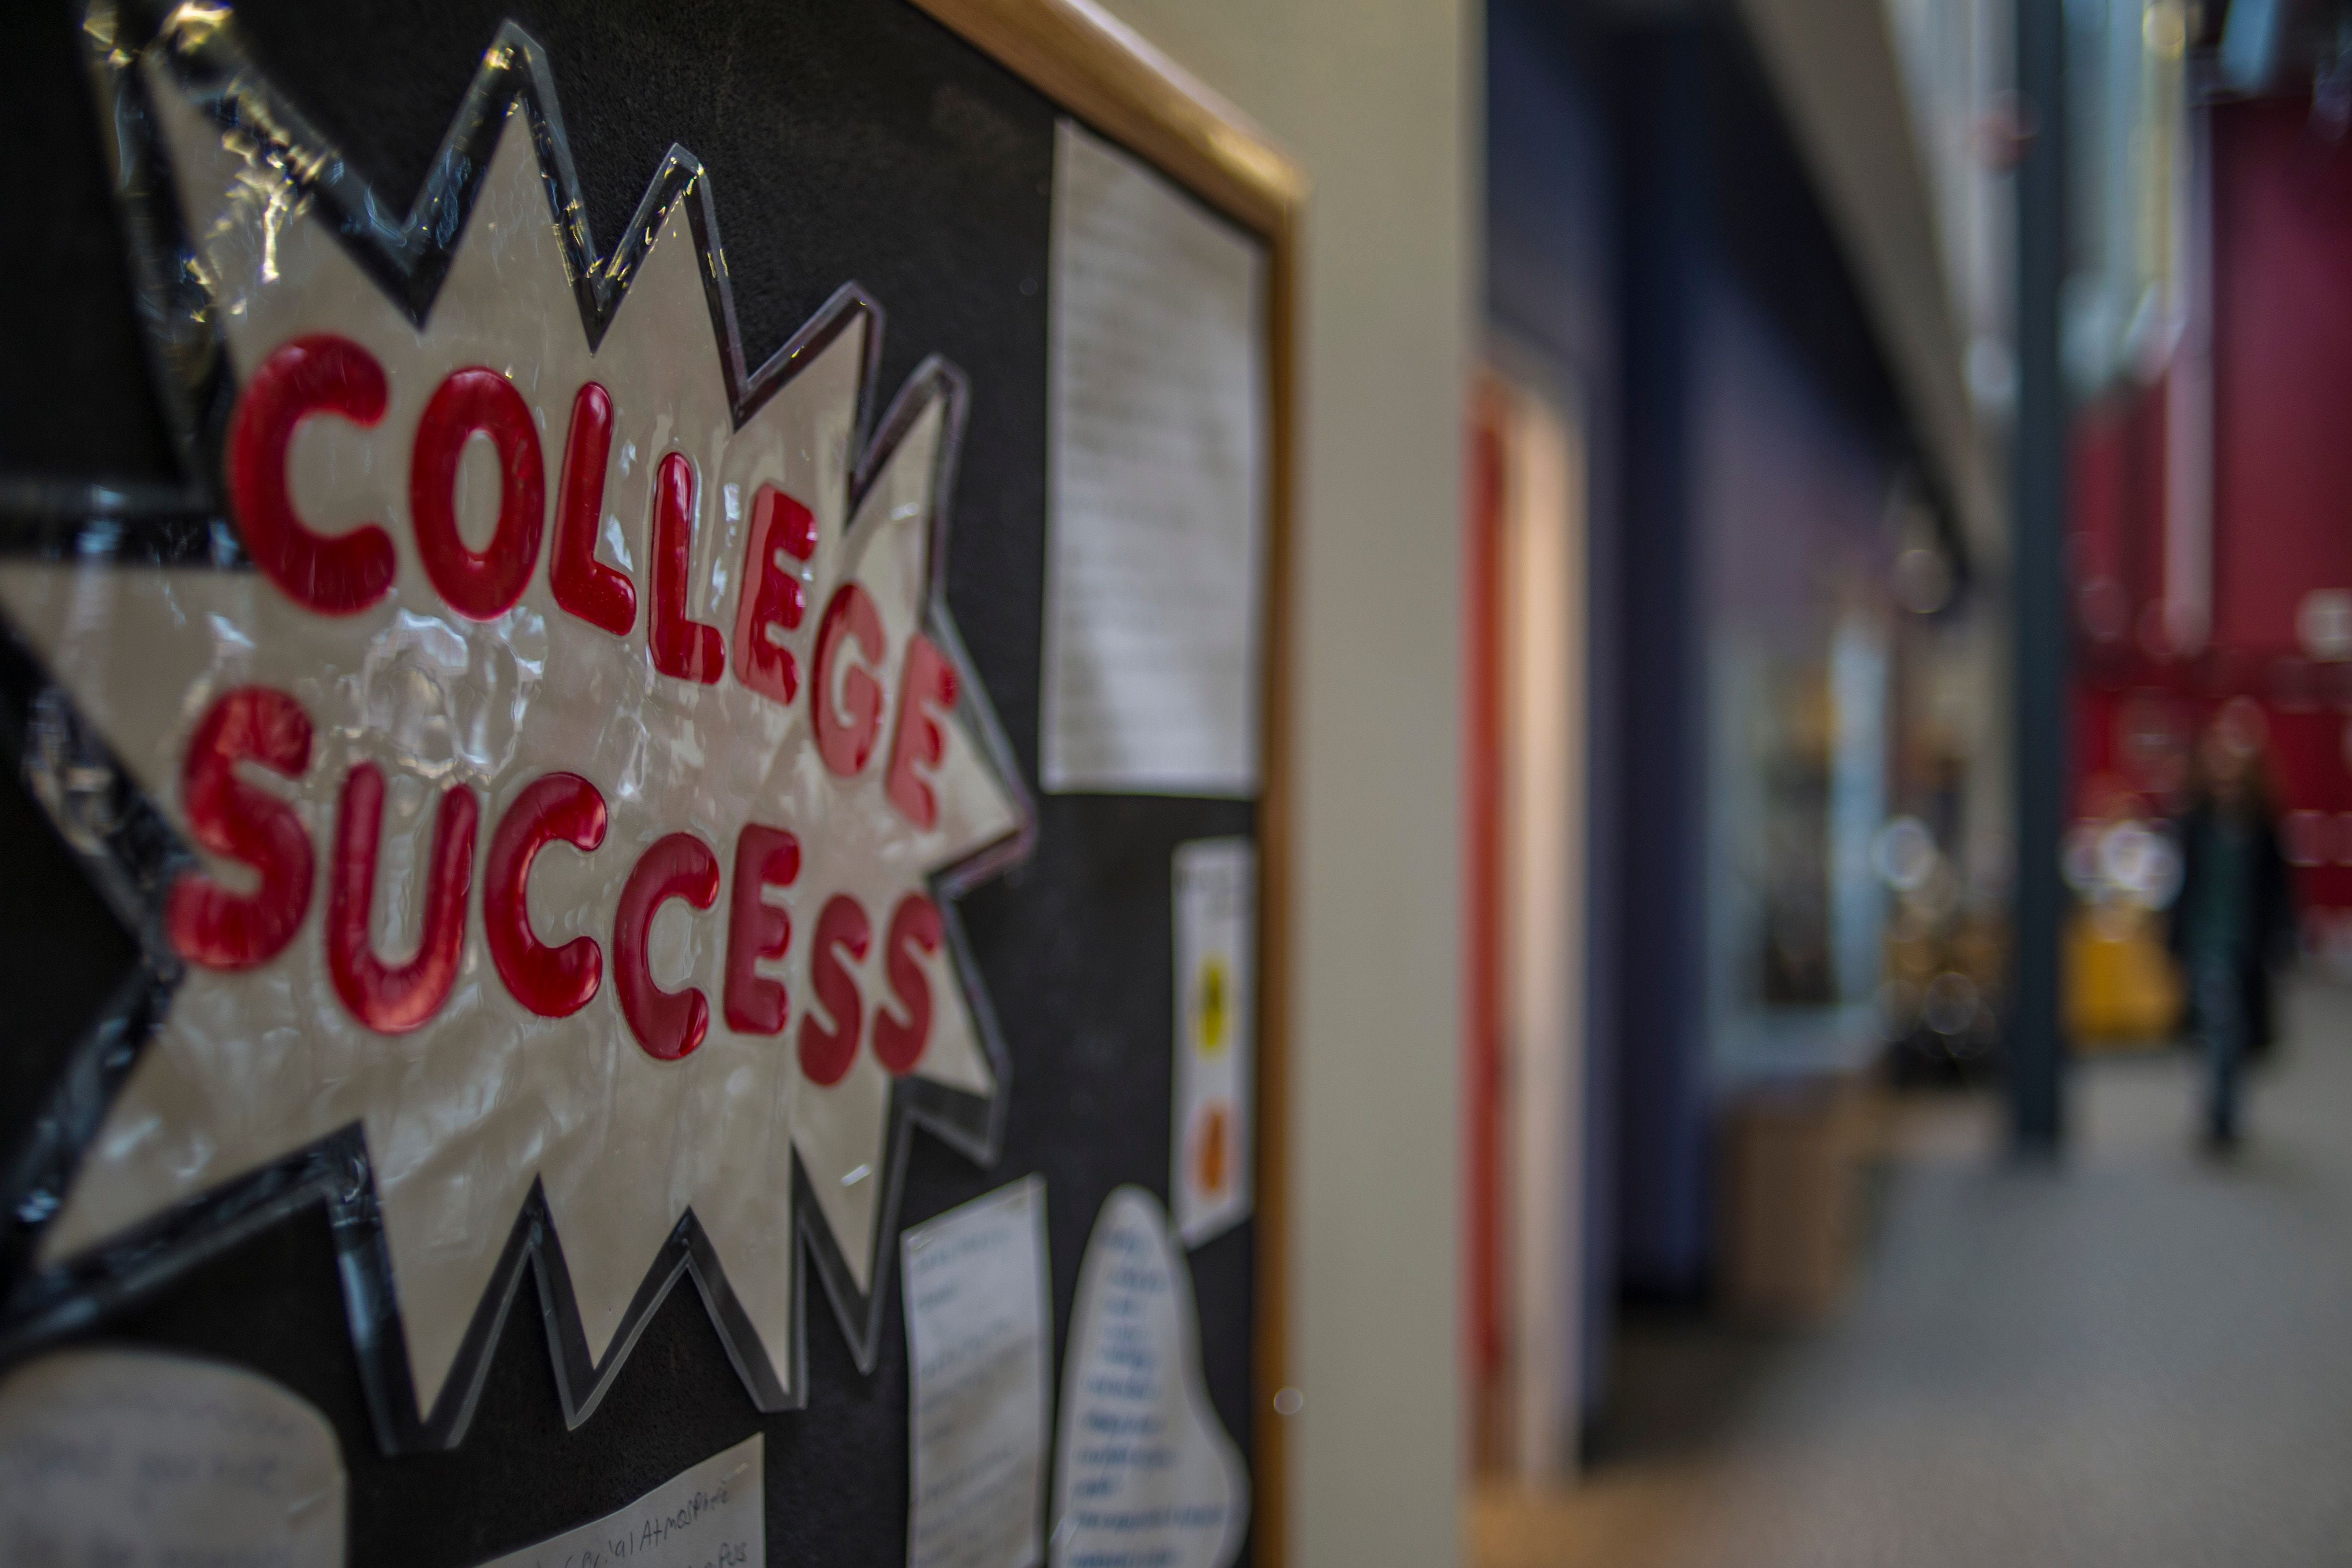 A bulletin board with a sign that reads “College Success” in bold red letters and a silver background.